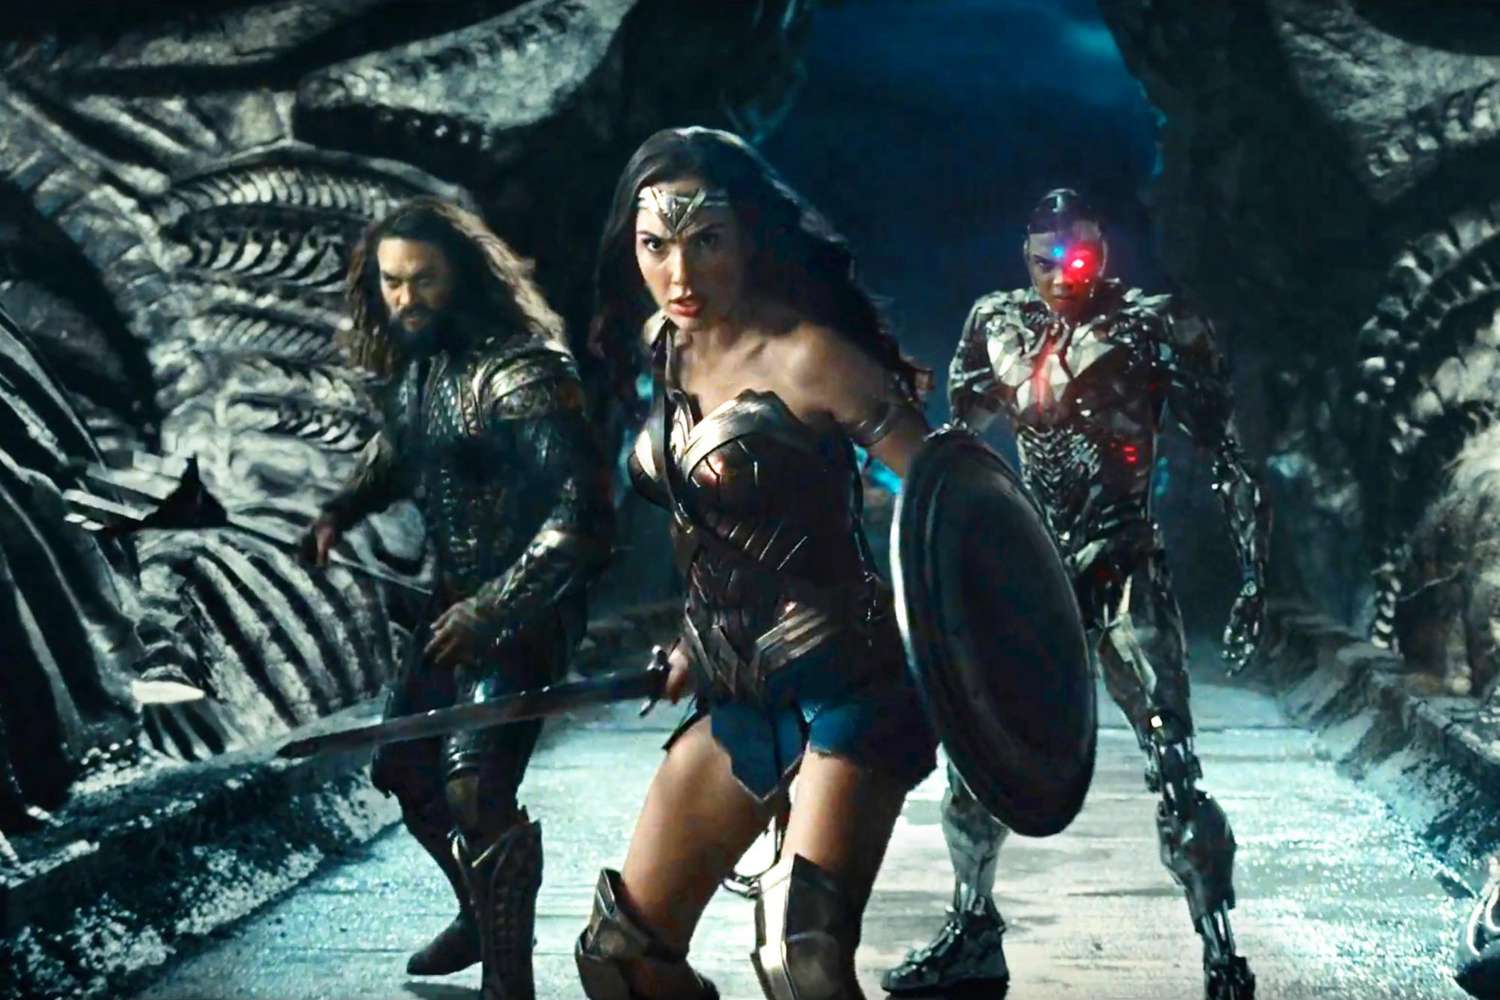 'Justice League' Trailer: A Frame-by-Frame Breakdown